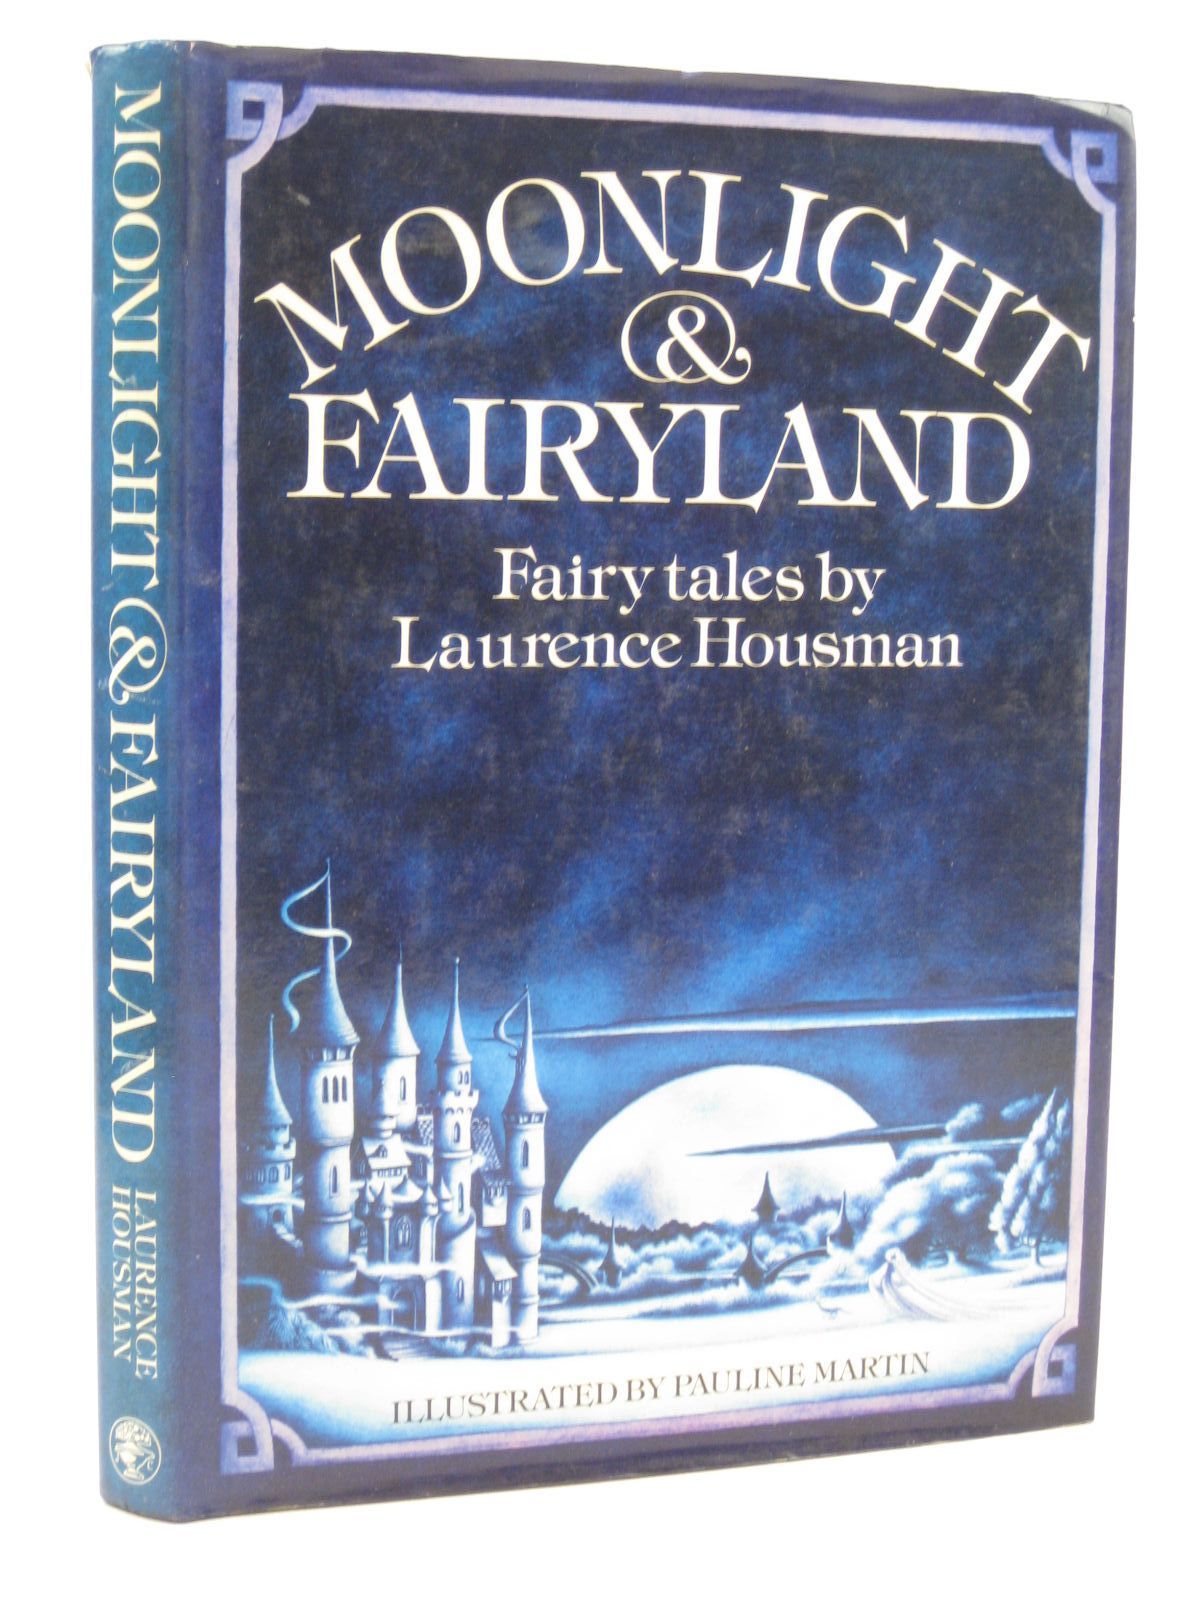 Cover of MOONLIGHT & FAIRYLAND by Laurence Housman